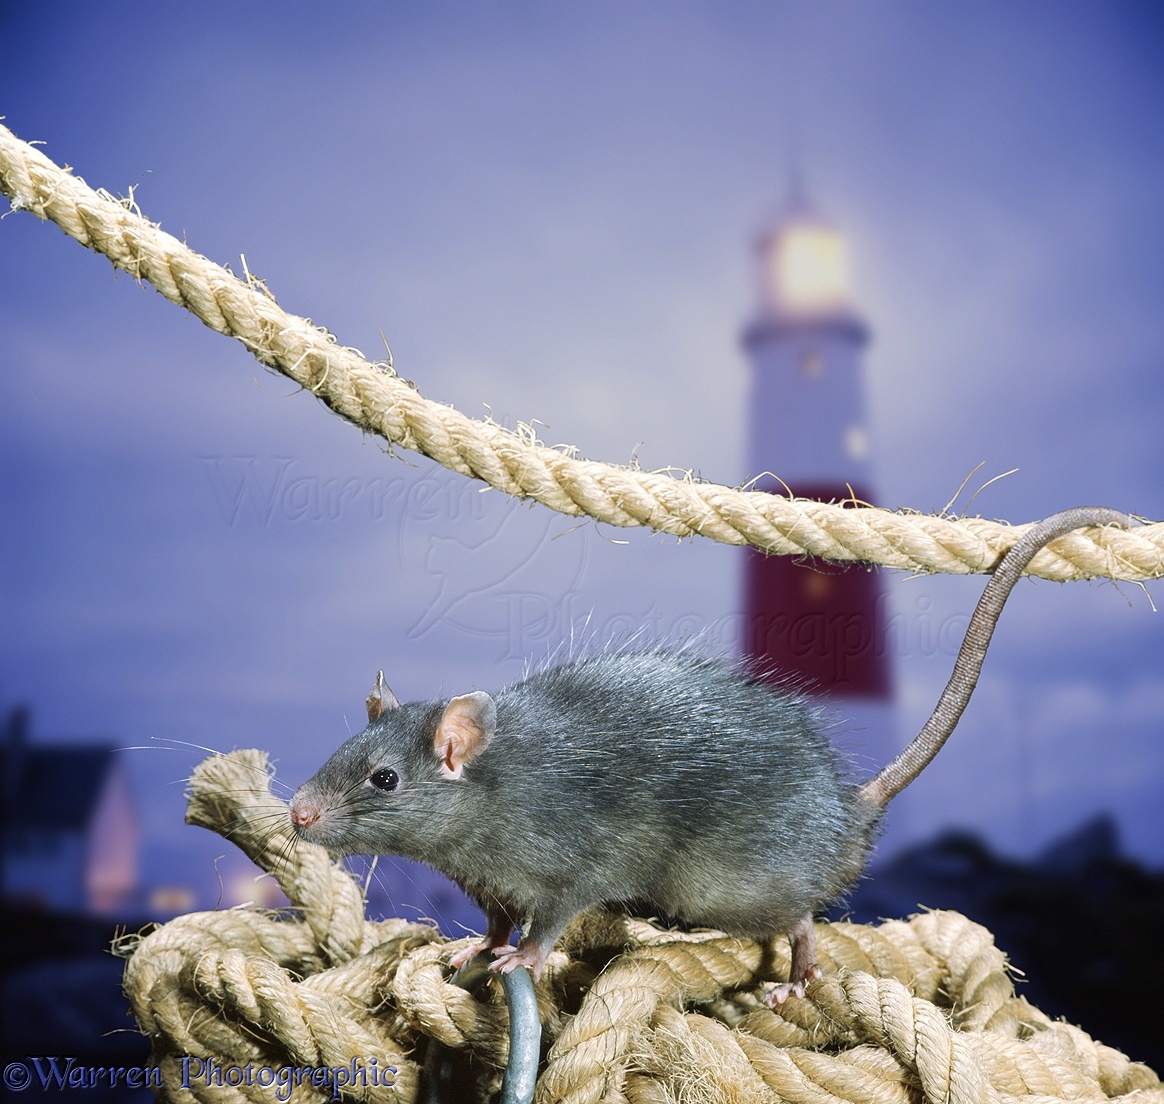 http://www.warrenphotographic.co.uk/photography/bigs/00744-Black-Rat-with-rope-and-lighthouse.jpg